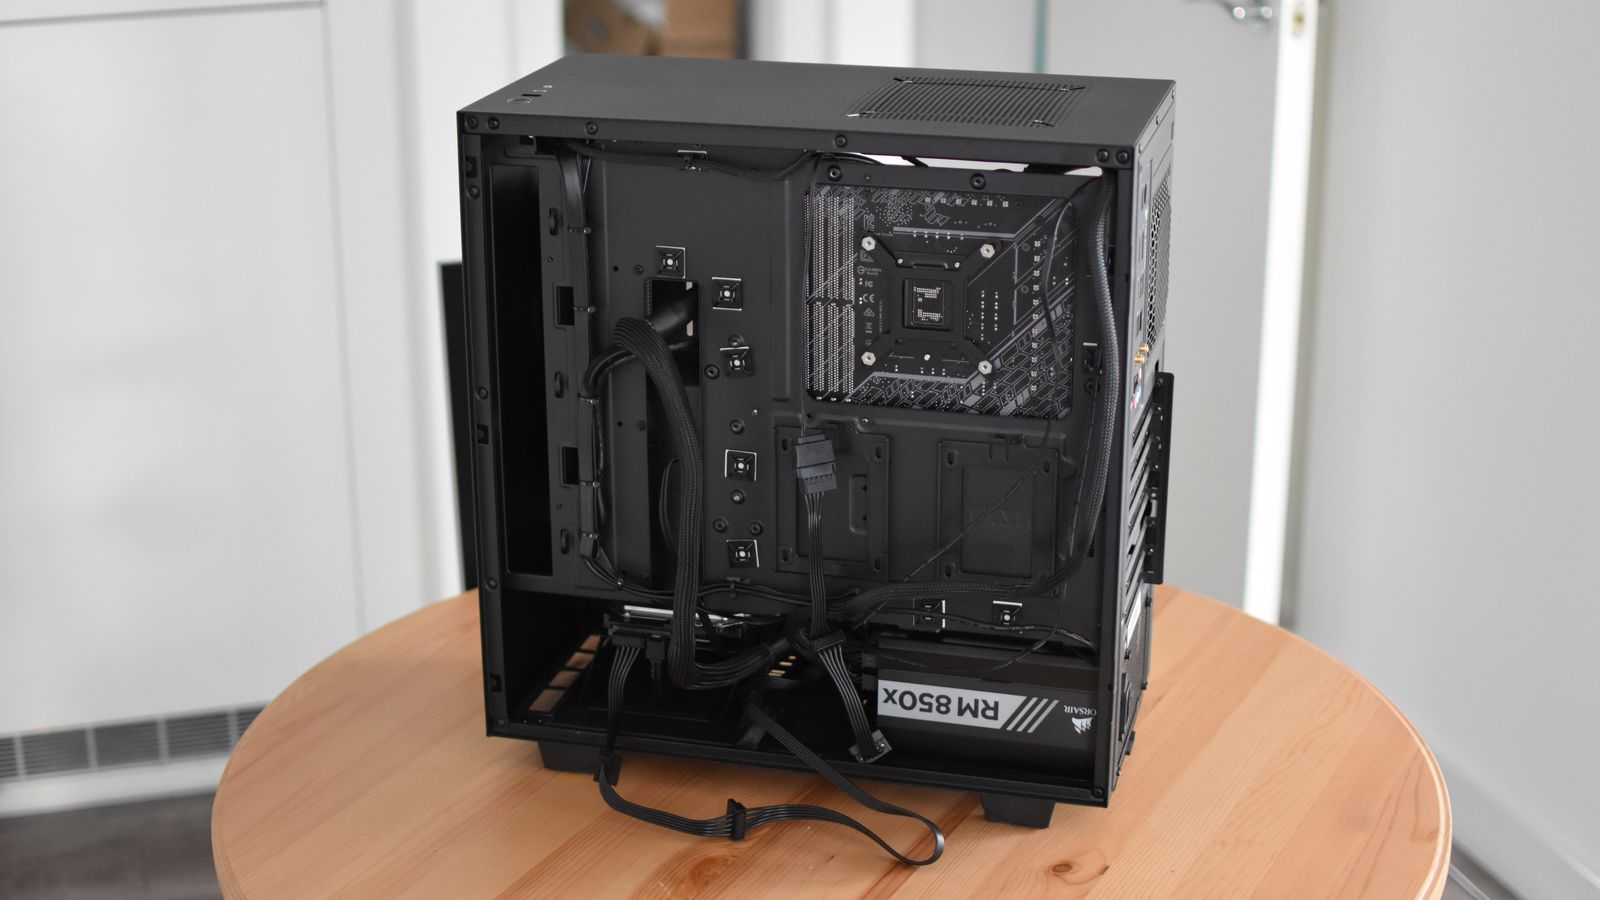 what-are-the-pluggin-called-on-the-front-of-a-pc-case